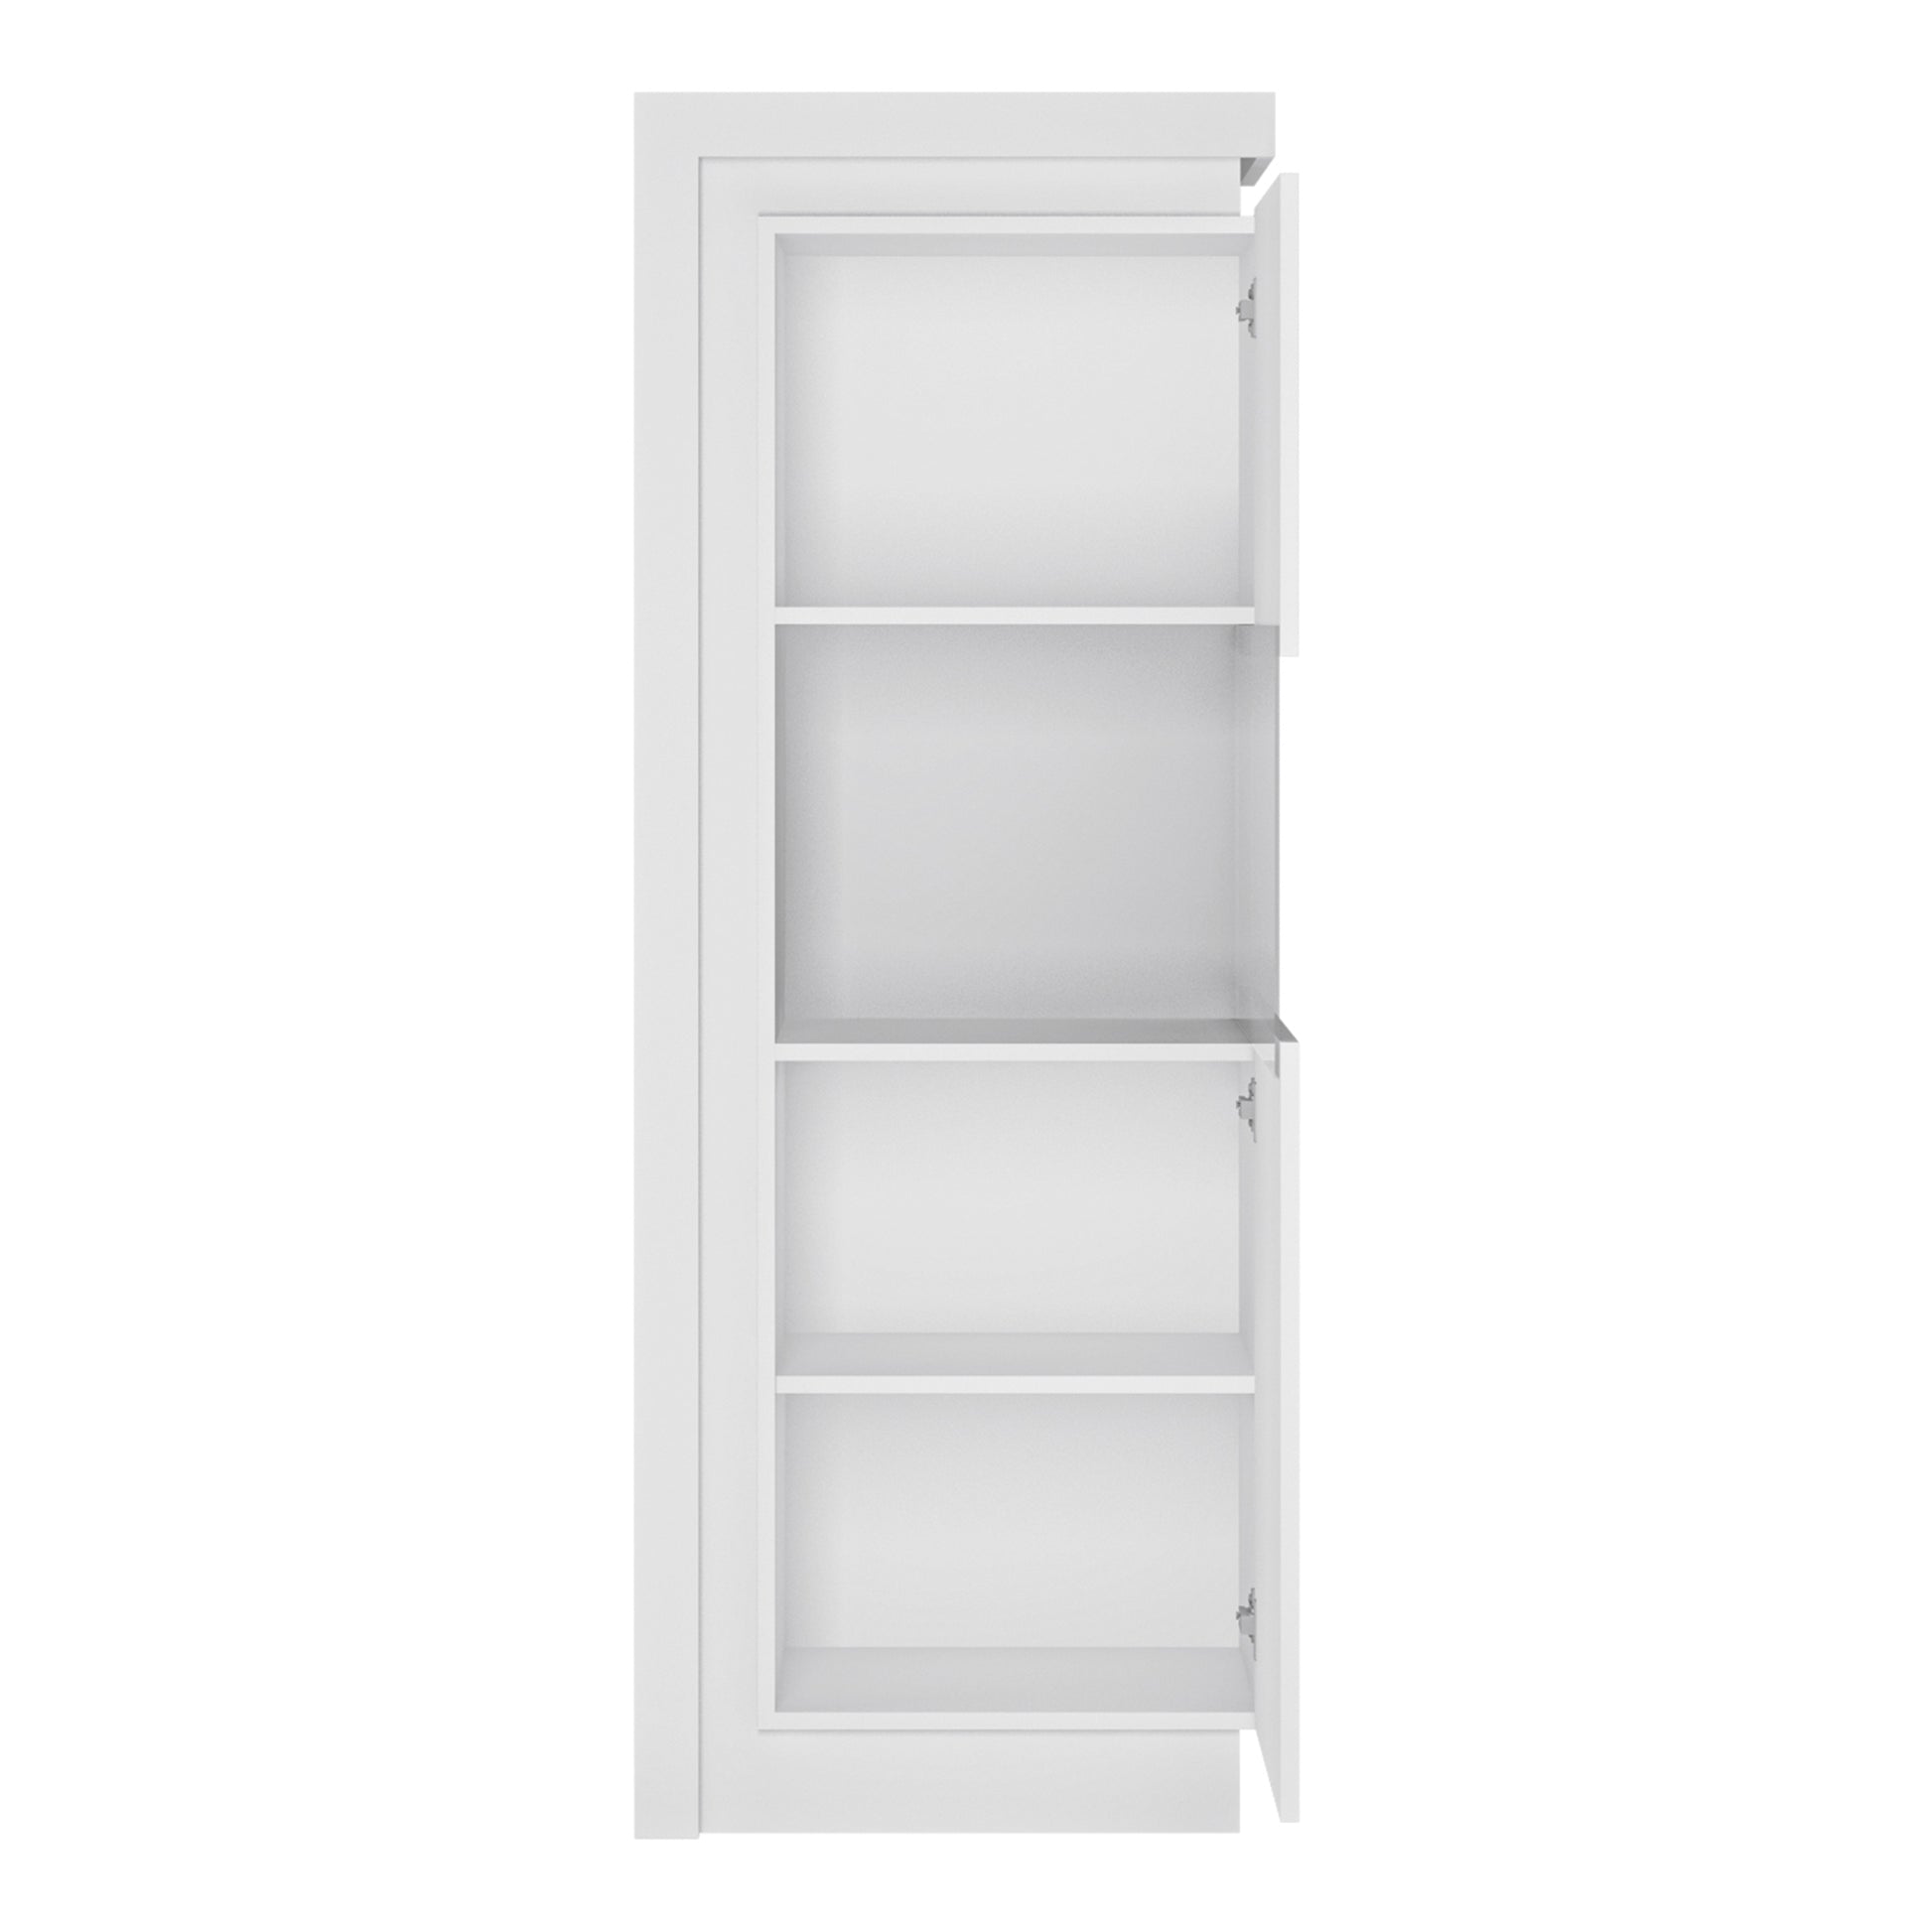 Lyon  Narrow display cabinet (RHD) 164.1cm high (including LED lighting) in White and High Gloss